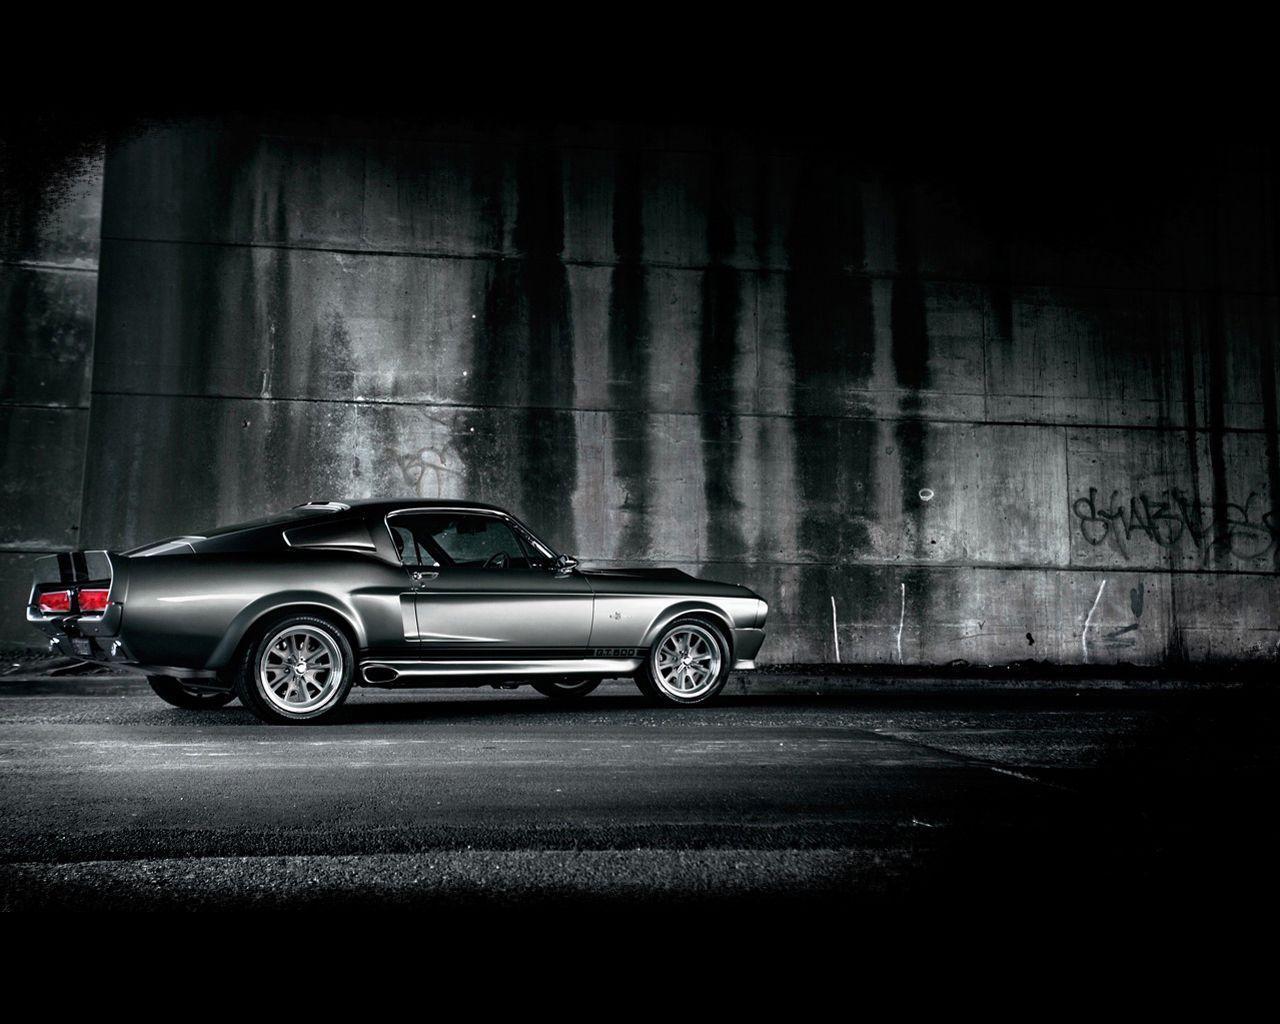 Wallpaper XYZ Picture of The New Ford Mustang Wallpaper Free